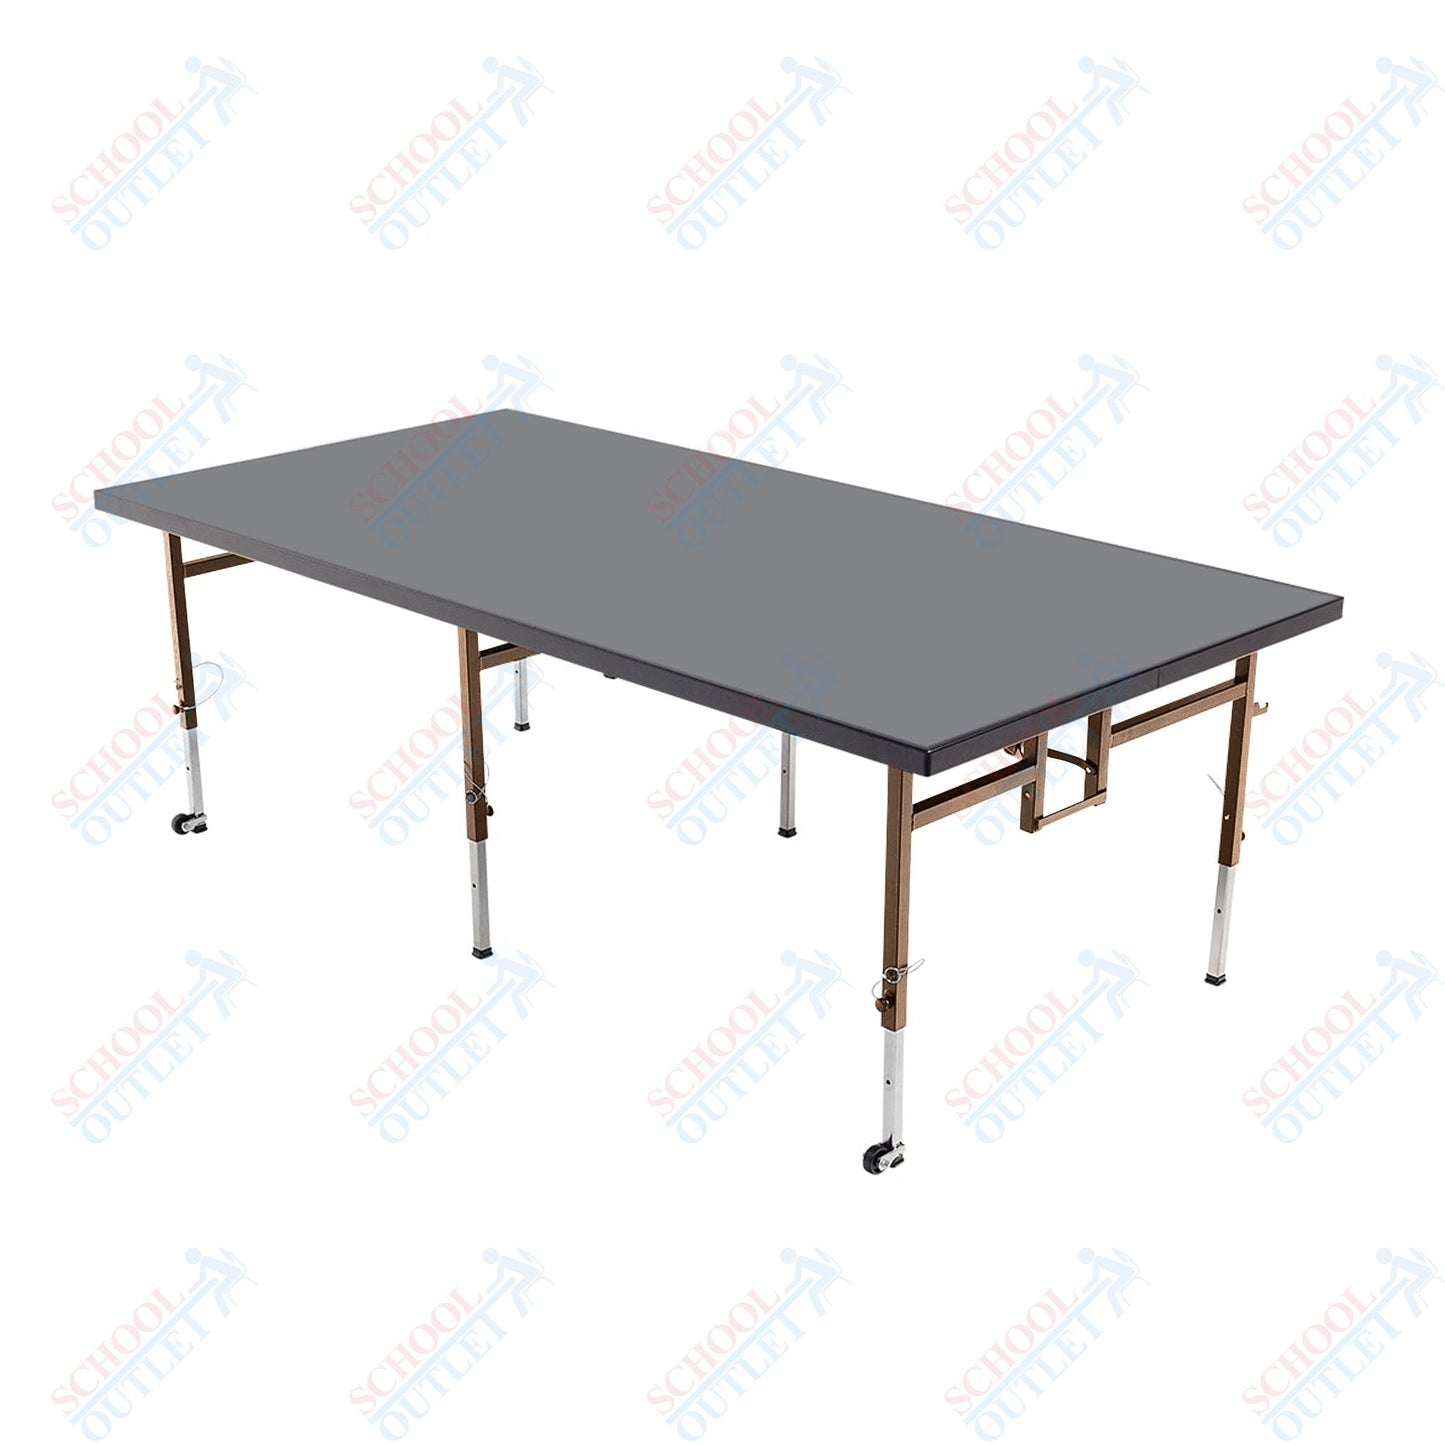 AmTab Adjustable Height Stage - Polypropylene Top - 48"W x 72"L x Adjustable 16" to 24"H (AmTab AMT-STA4616P) - SchoolOutlet